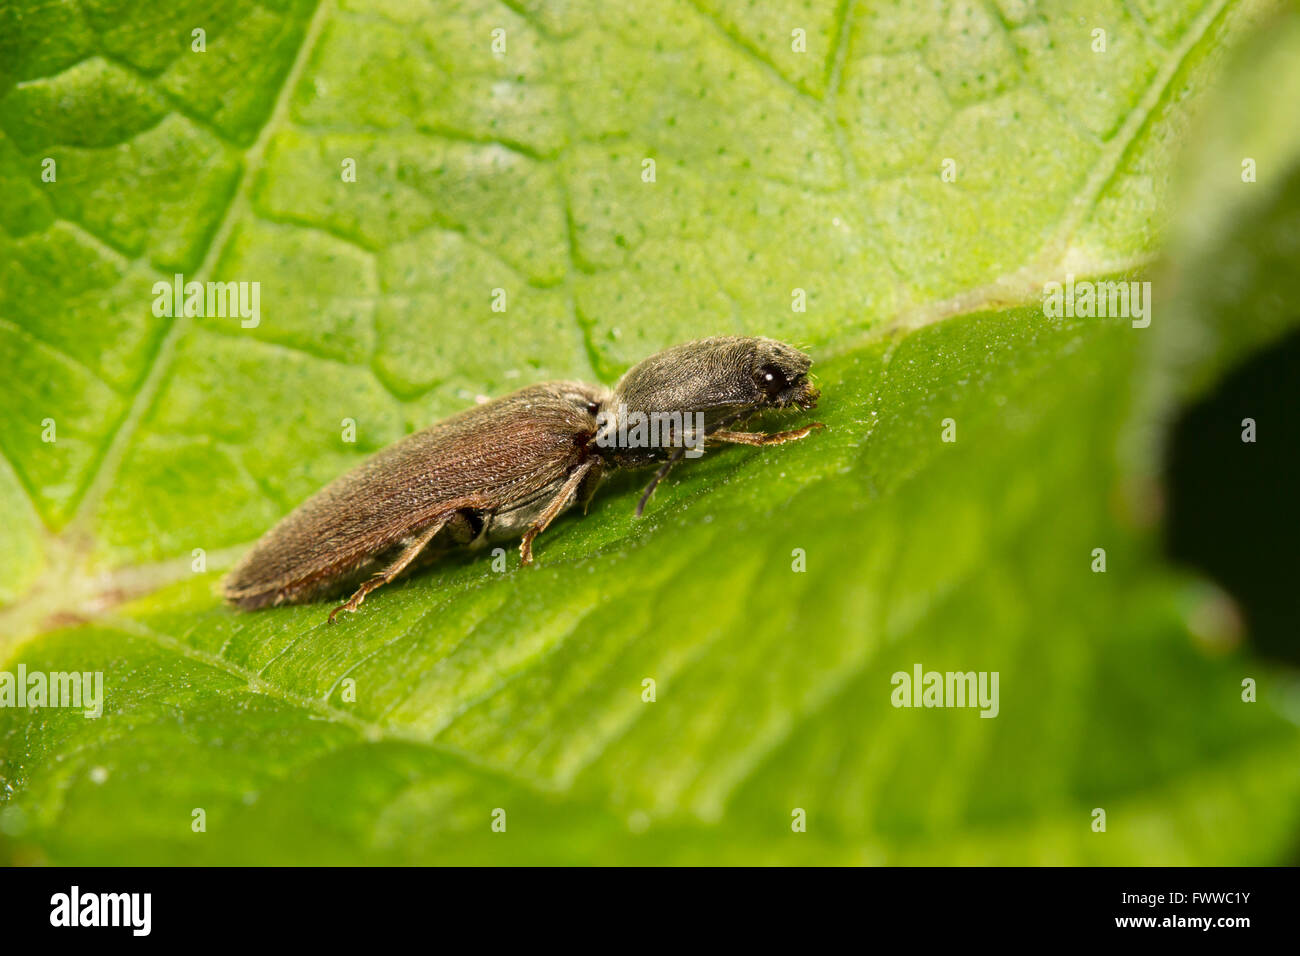 Adult click beetle, Athous haemorrhoidalis.  The wireworm larvae are an agricultural pest. Stock Photo